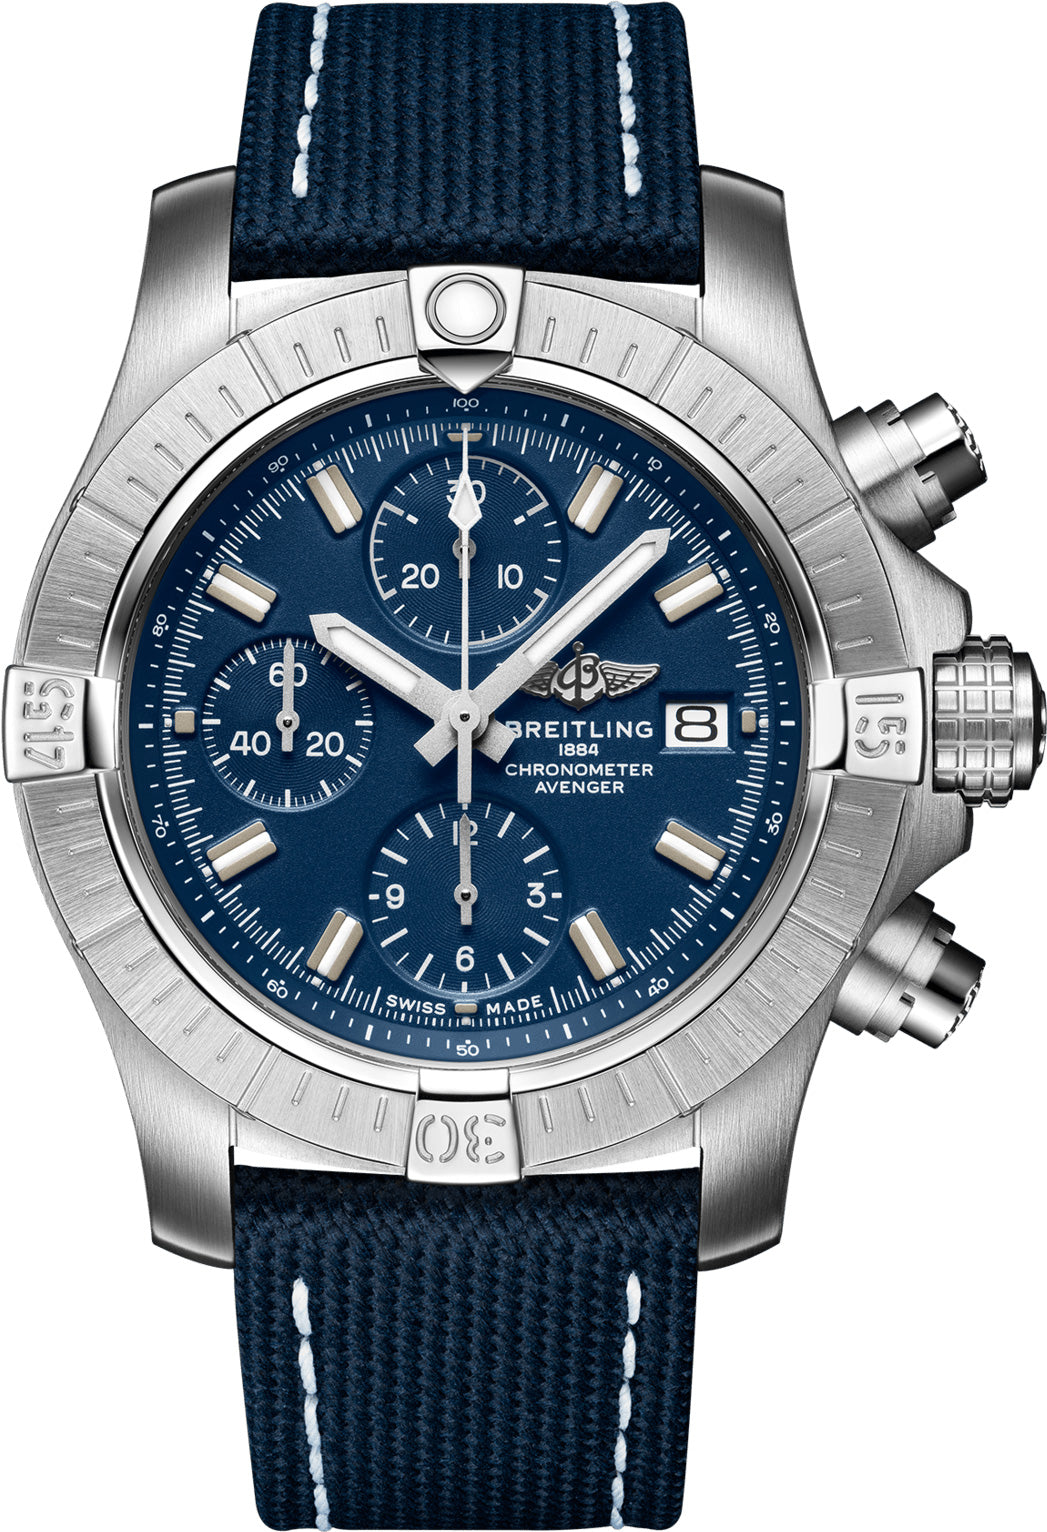 Breitling Watch Avenger Chronograph 43 Leather Tang Type